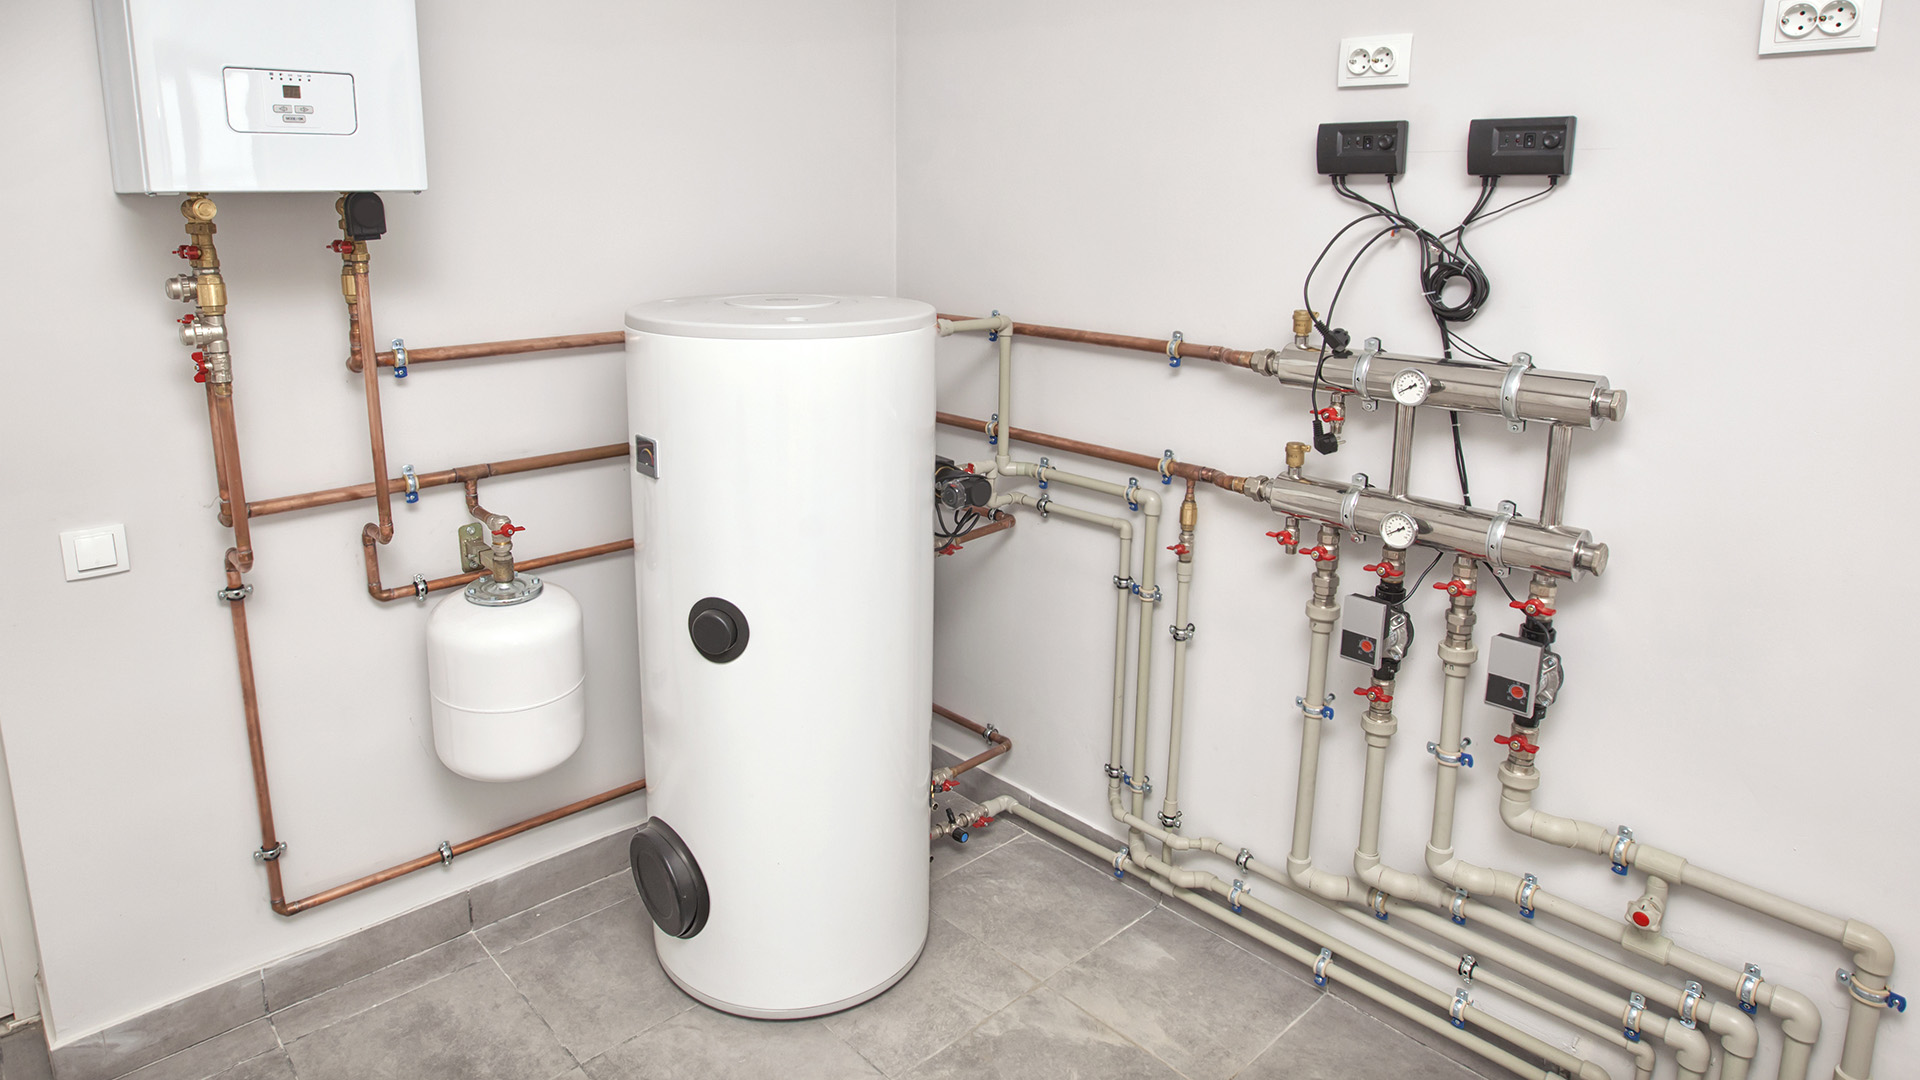 Tanked hot water heater system